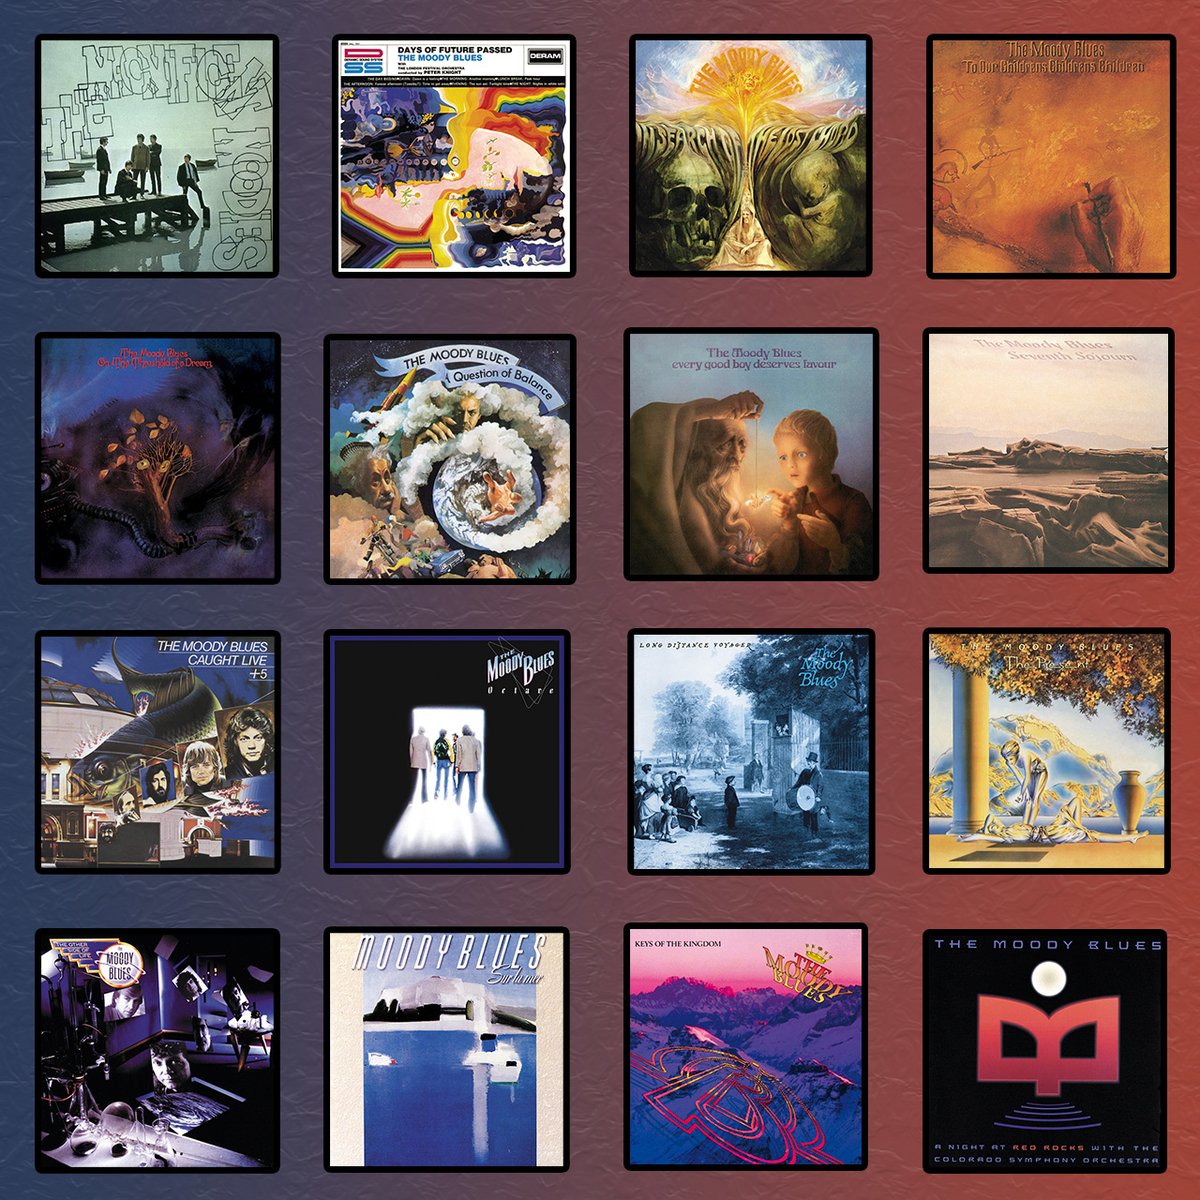 What's your favorite Moody Blues Album? 💿 Let us know below ⬇️